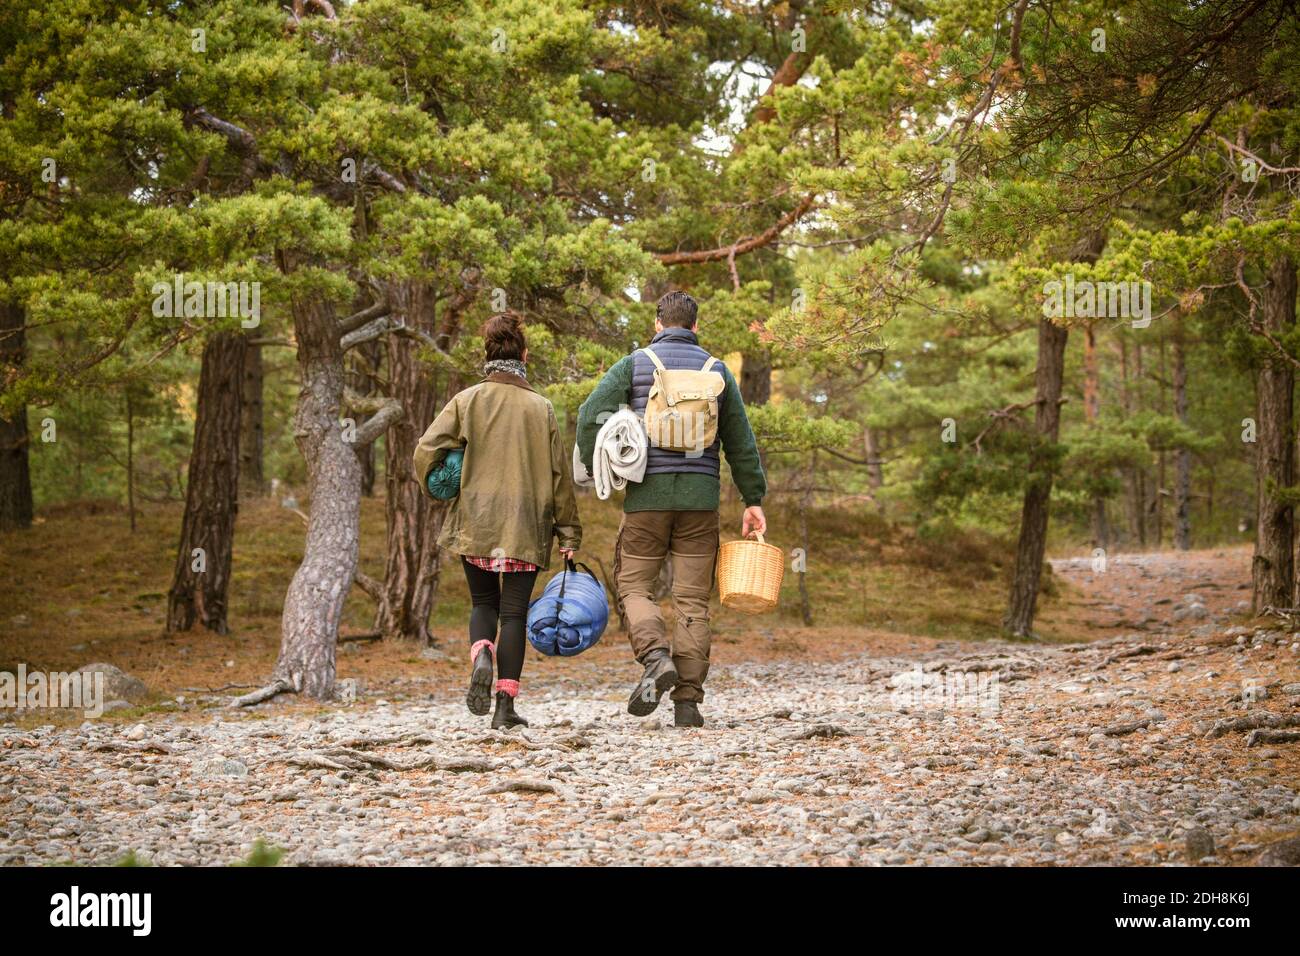 Rear view of couple carrying sleeping bags and basket in forest Stock Photo